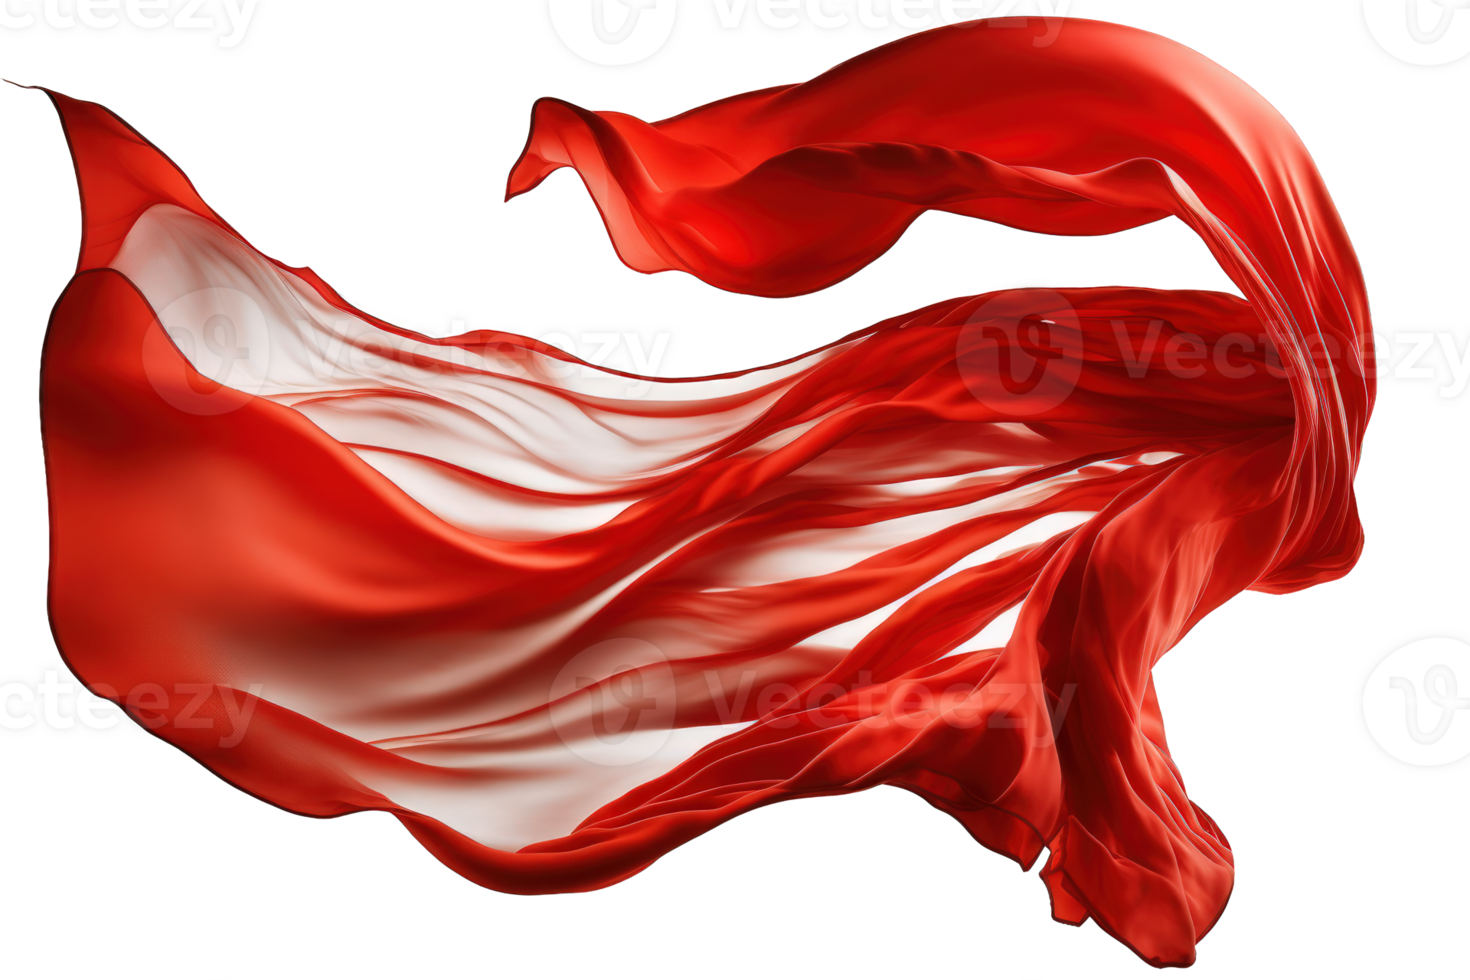 The image is a flowing and vibrant red silk that appears to be suspended in mid-air against a see-through background, giving it a sense of weightlessness and movement. png